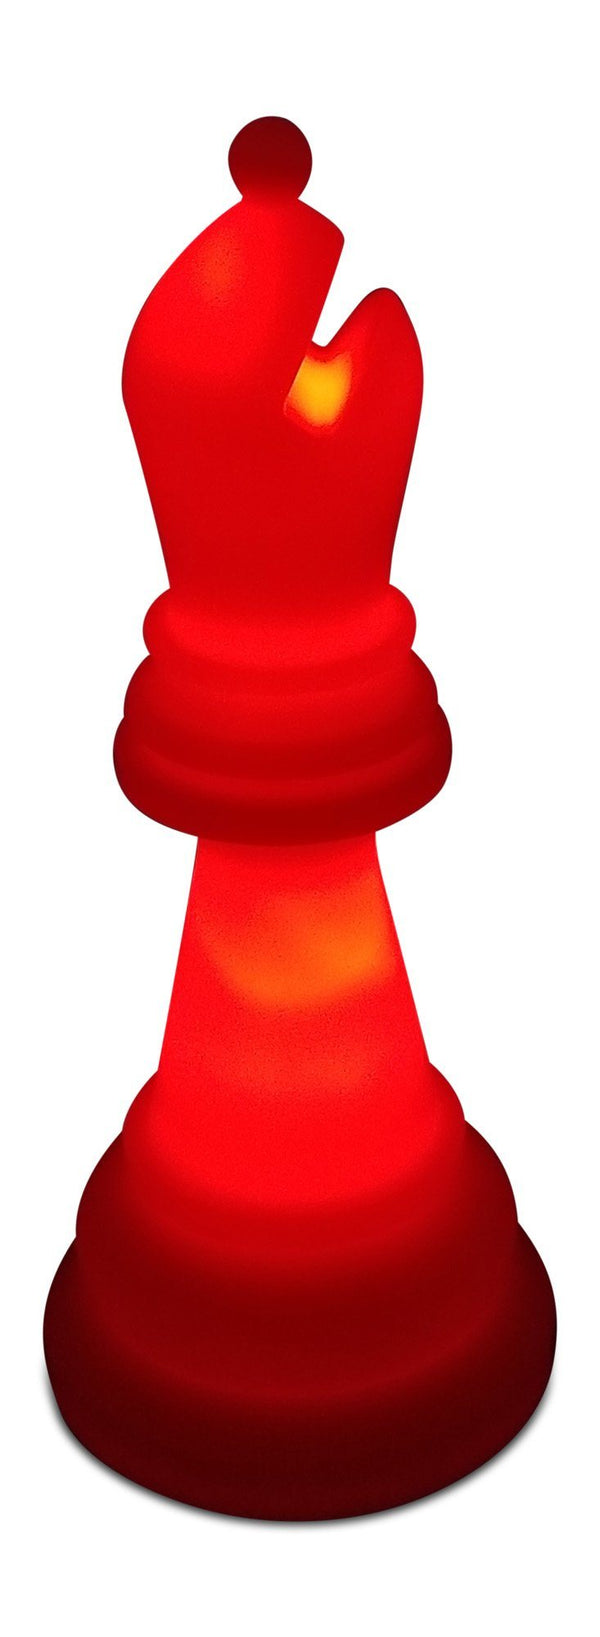 MegaChess 20 Inch Perfect Bishop Light-Up Giant Chess Piece - Red |  | MegaChess.com